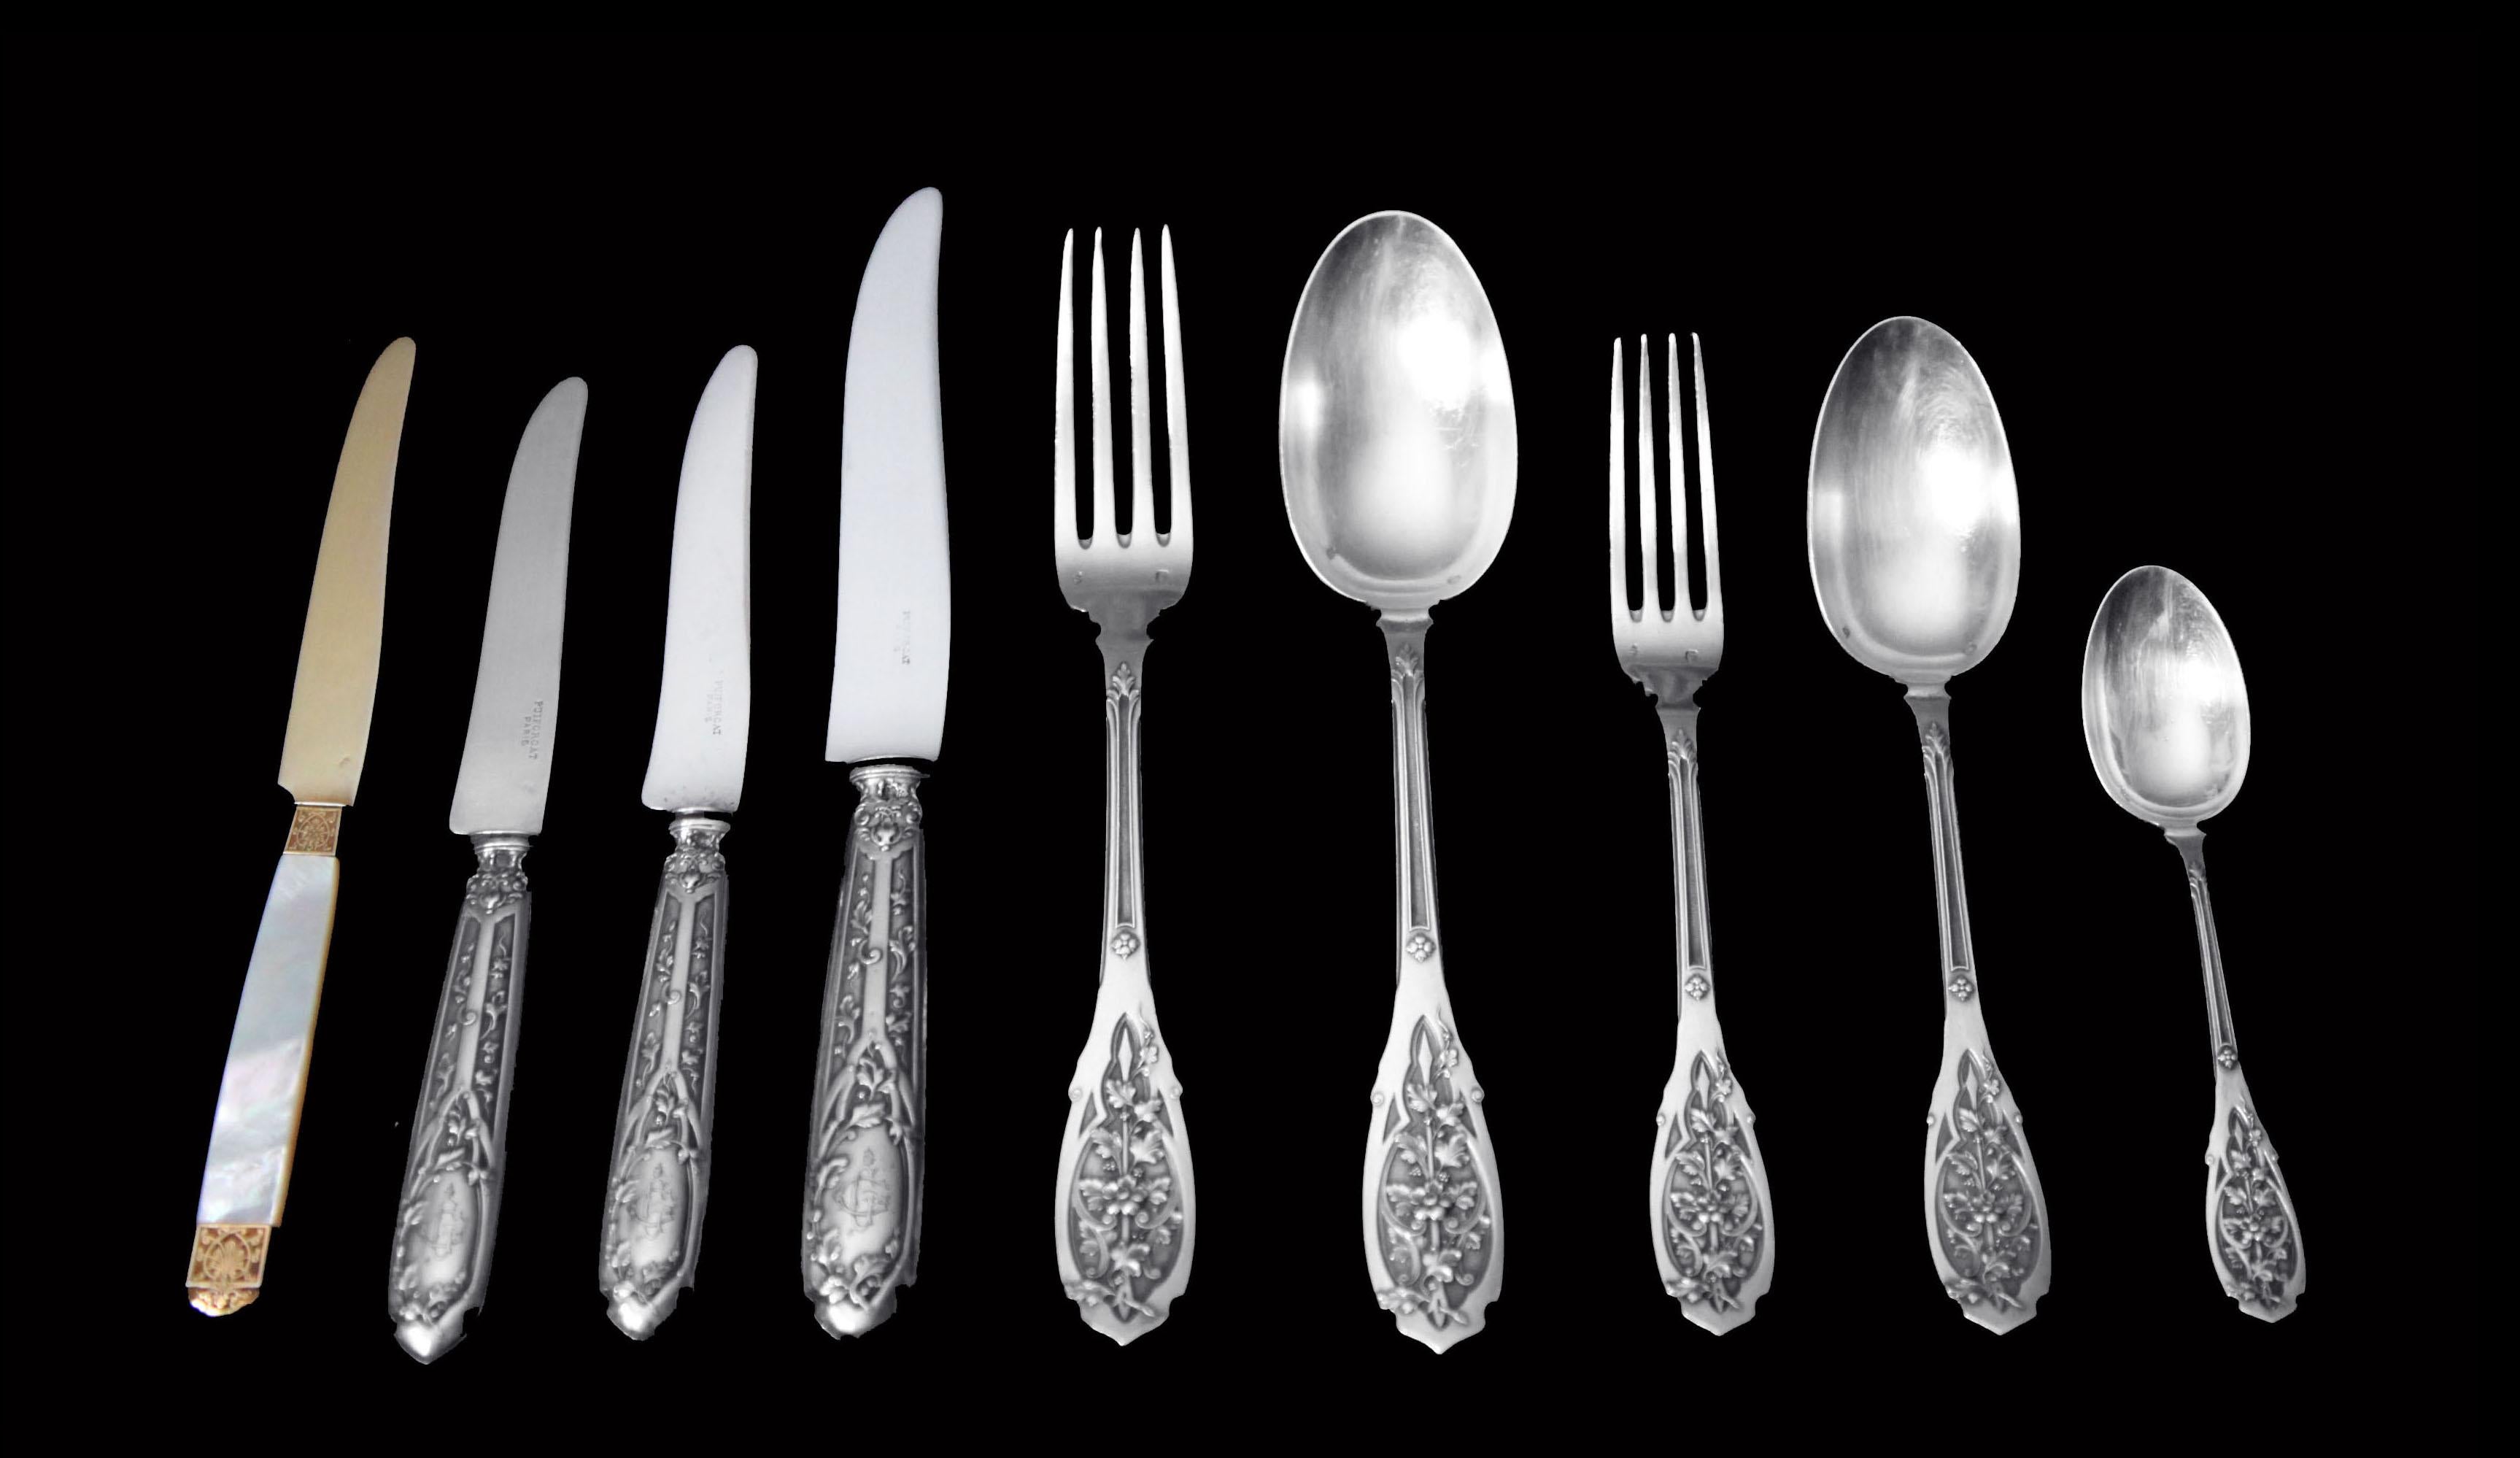 Direct from Paris, a Magnificent 170pc. 950 Sterling Silver Art Nouveau Flatware Set with 8 Serving Pieces by the World's Premier French Silversmith 